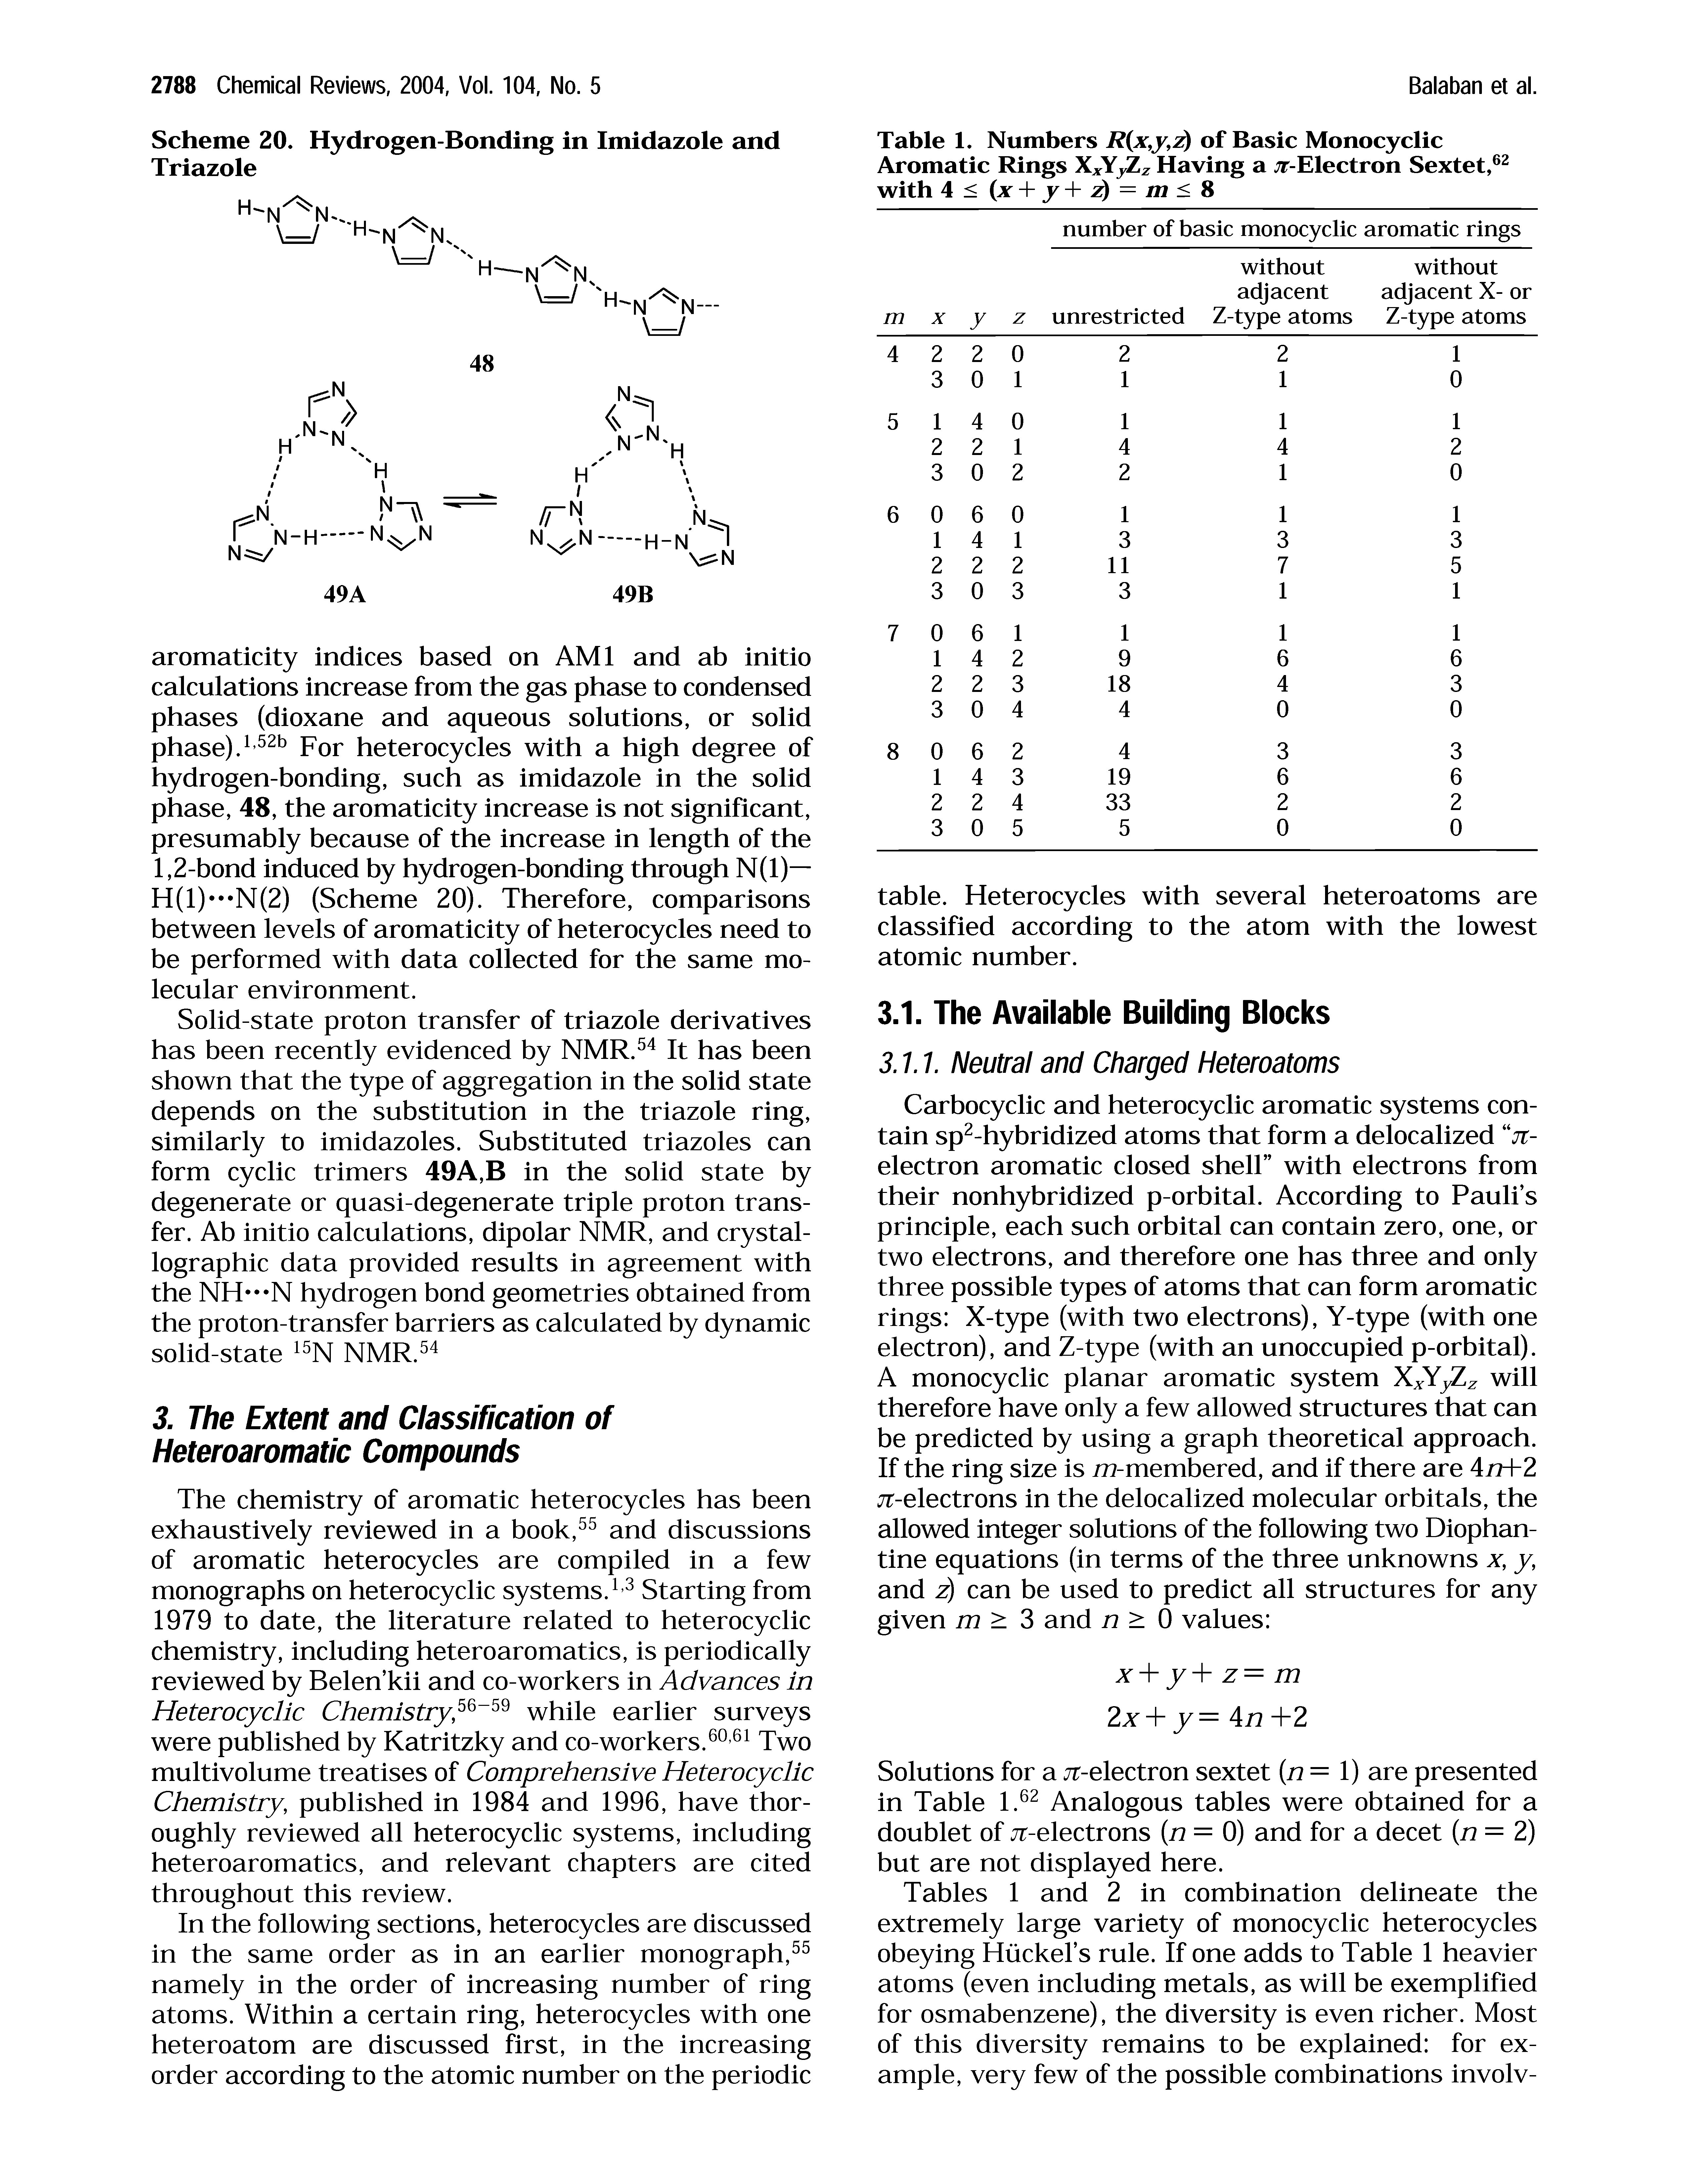 Tables 1 and 2 in combination delineate the extremely large variety of monocyclic heterocycles obeying Huckel s rule. If one adds to Table 1 heavier atoms (even including metals, as will be exemplified for osmabenzene), the diversity is even richer. Most of this diversity remains to be explained for example, very few of the possible combinations involv-...